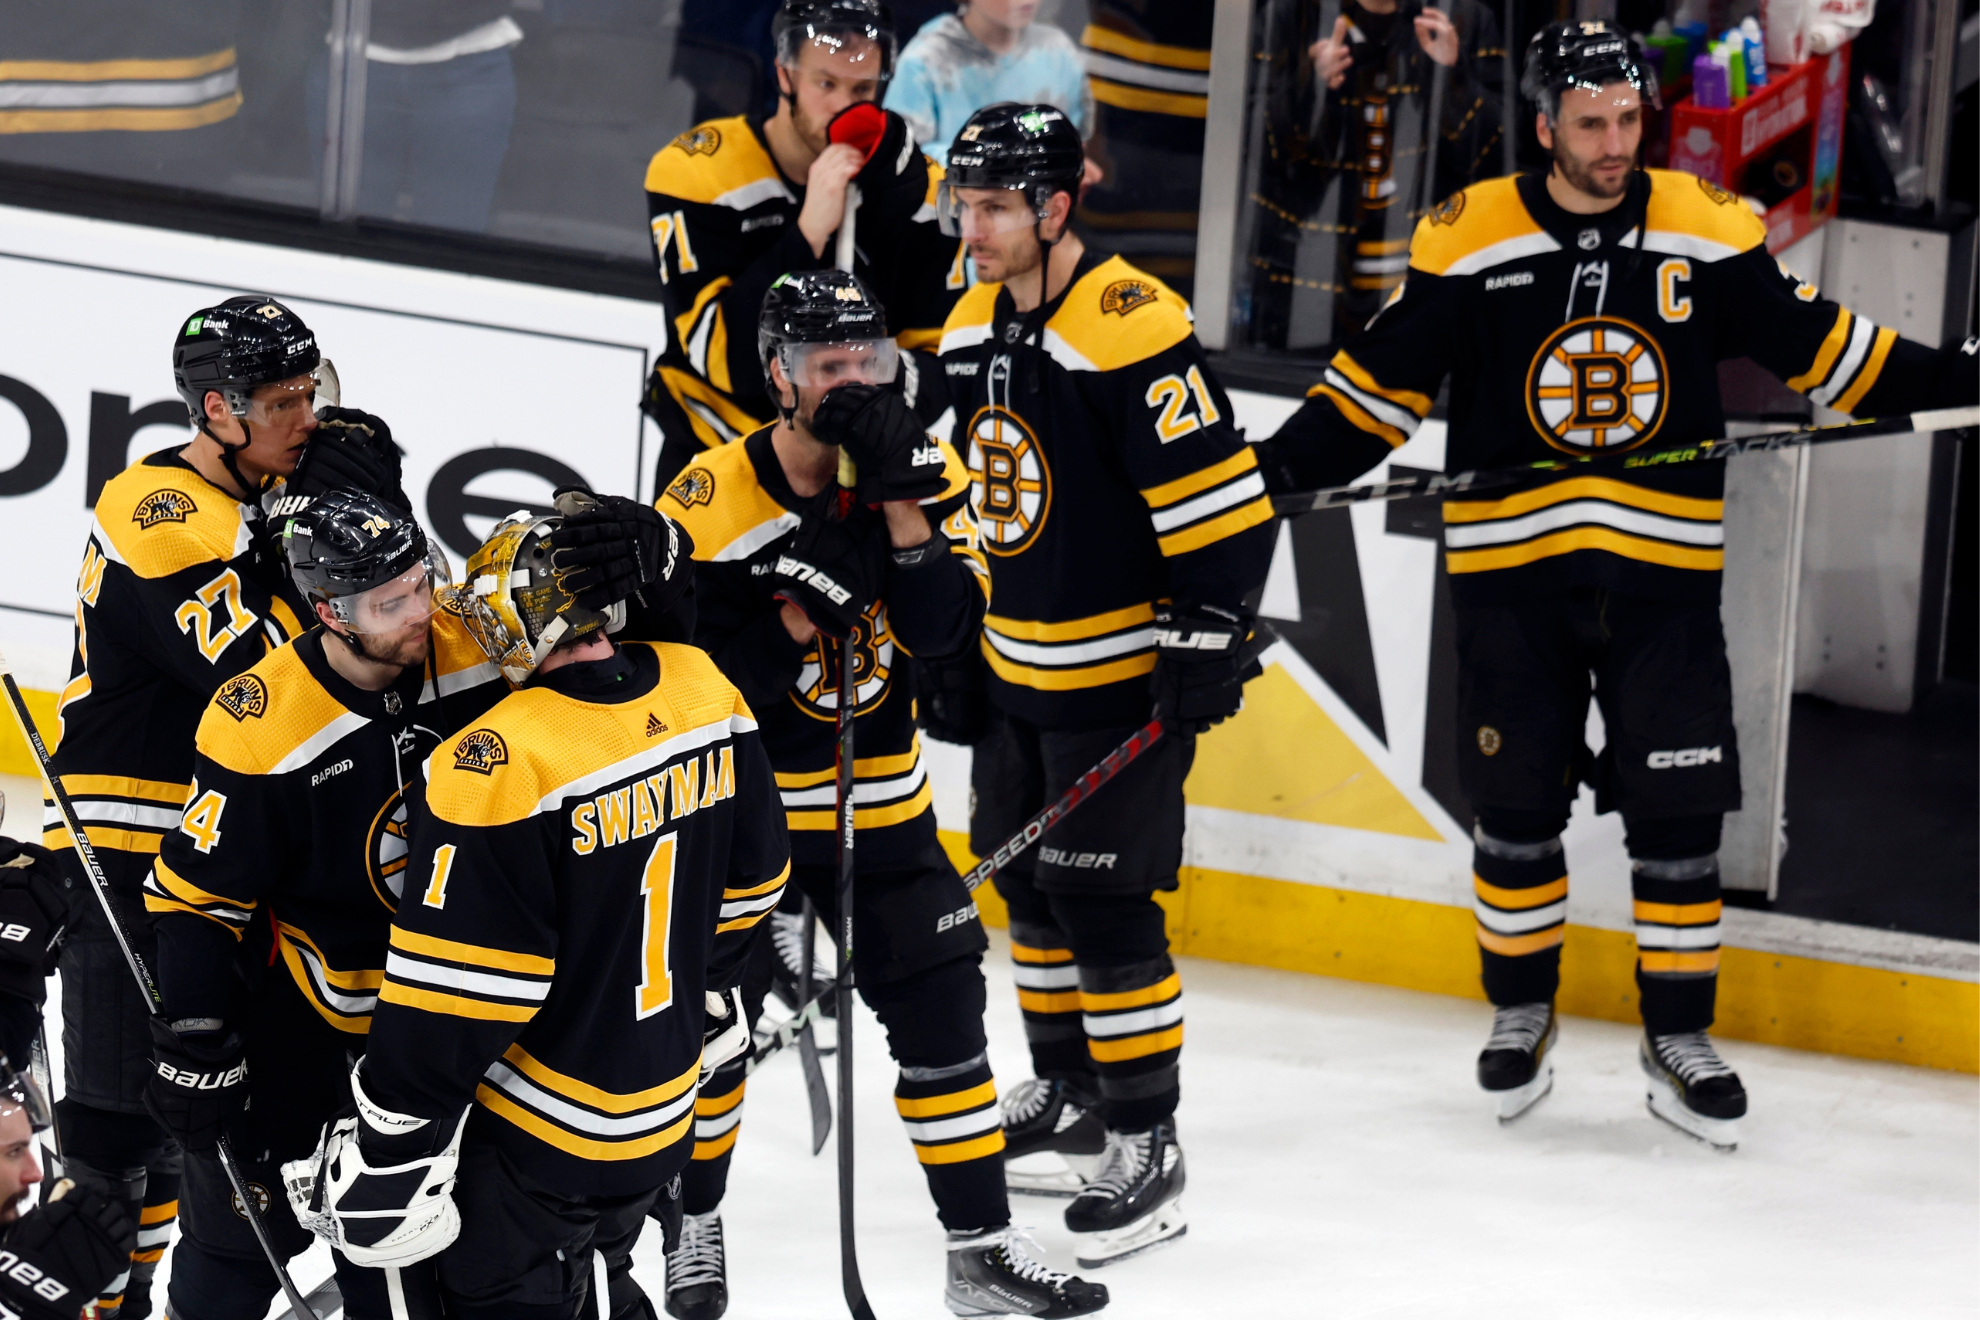 The Bruins blew a 3-1 series lead against the Panthers and saw their dream season come to an end.